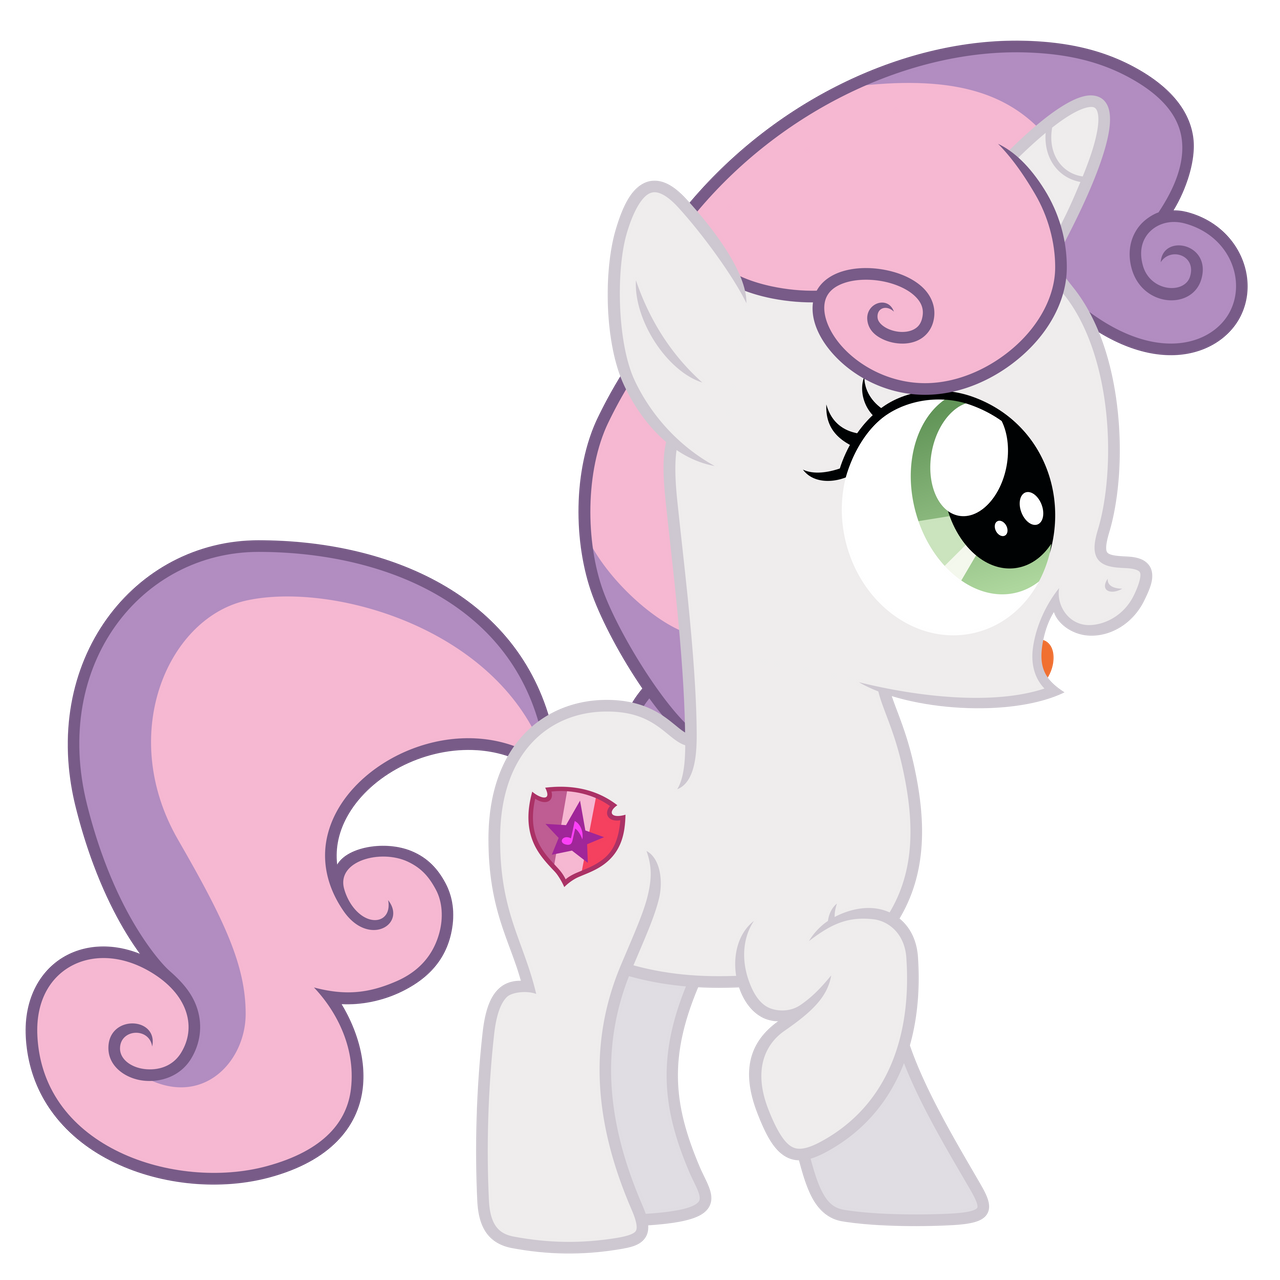 Sweetie Belle Wants To See!